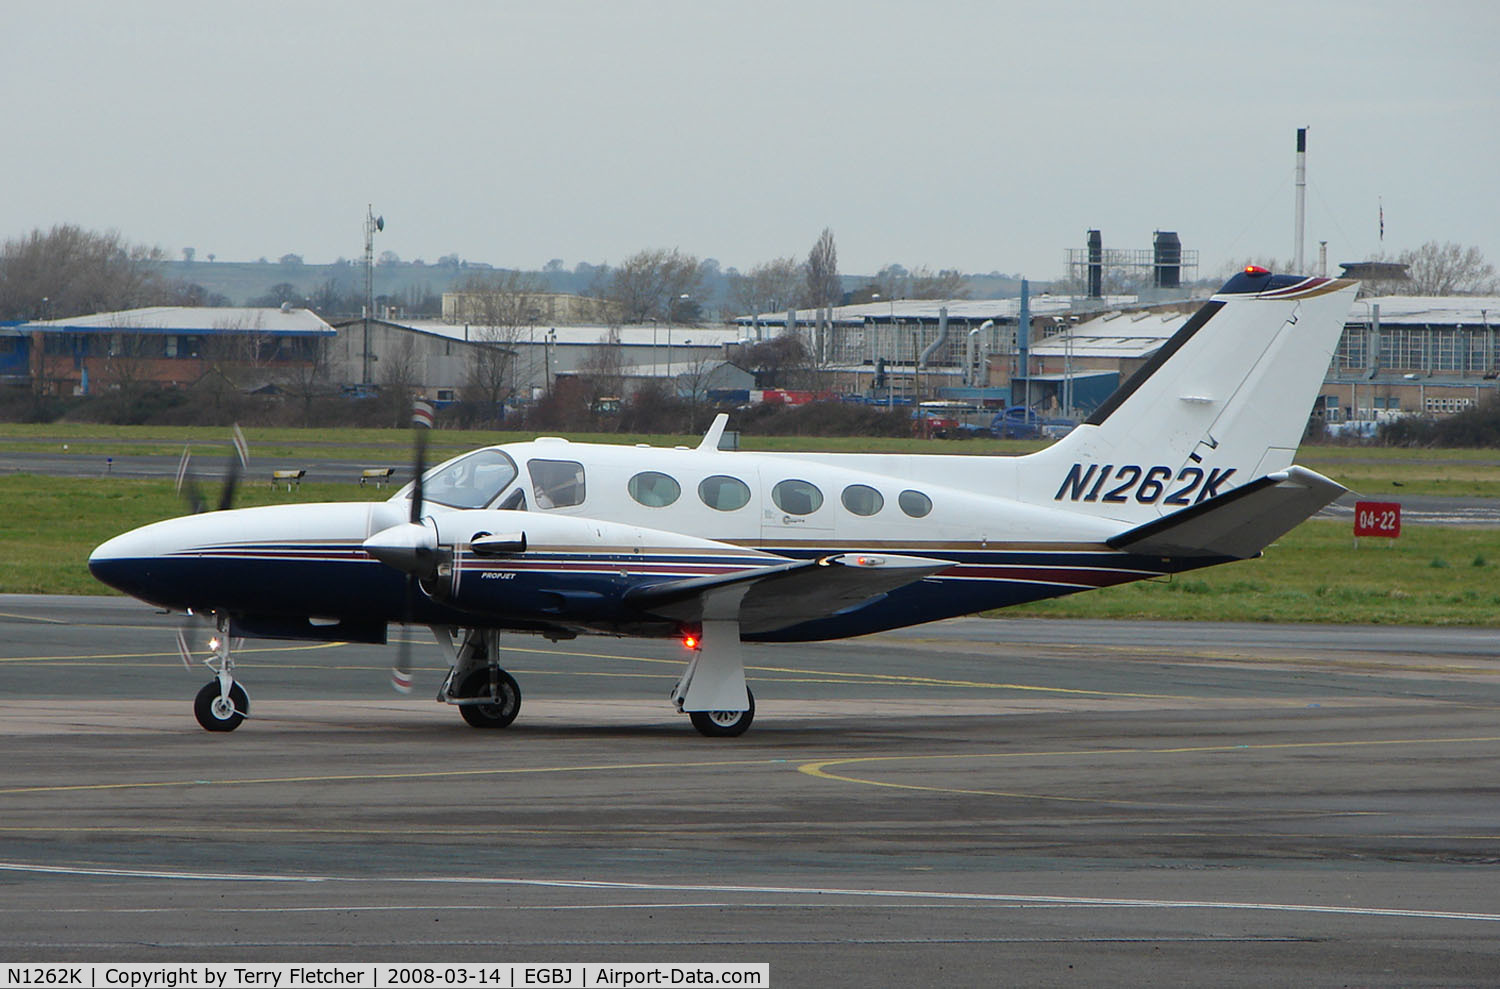 N1262K, 1985 Cessna 425 Conquest 1 C/N 425-0234, A visitor to Gloucestershire Airport on the day of the horse racing Gold Cup  at the nearby Cheltenham Racecourse